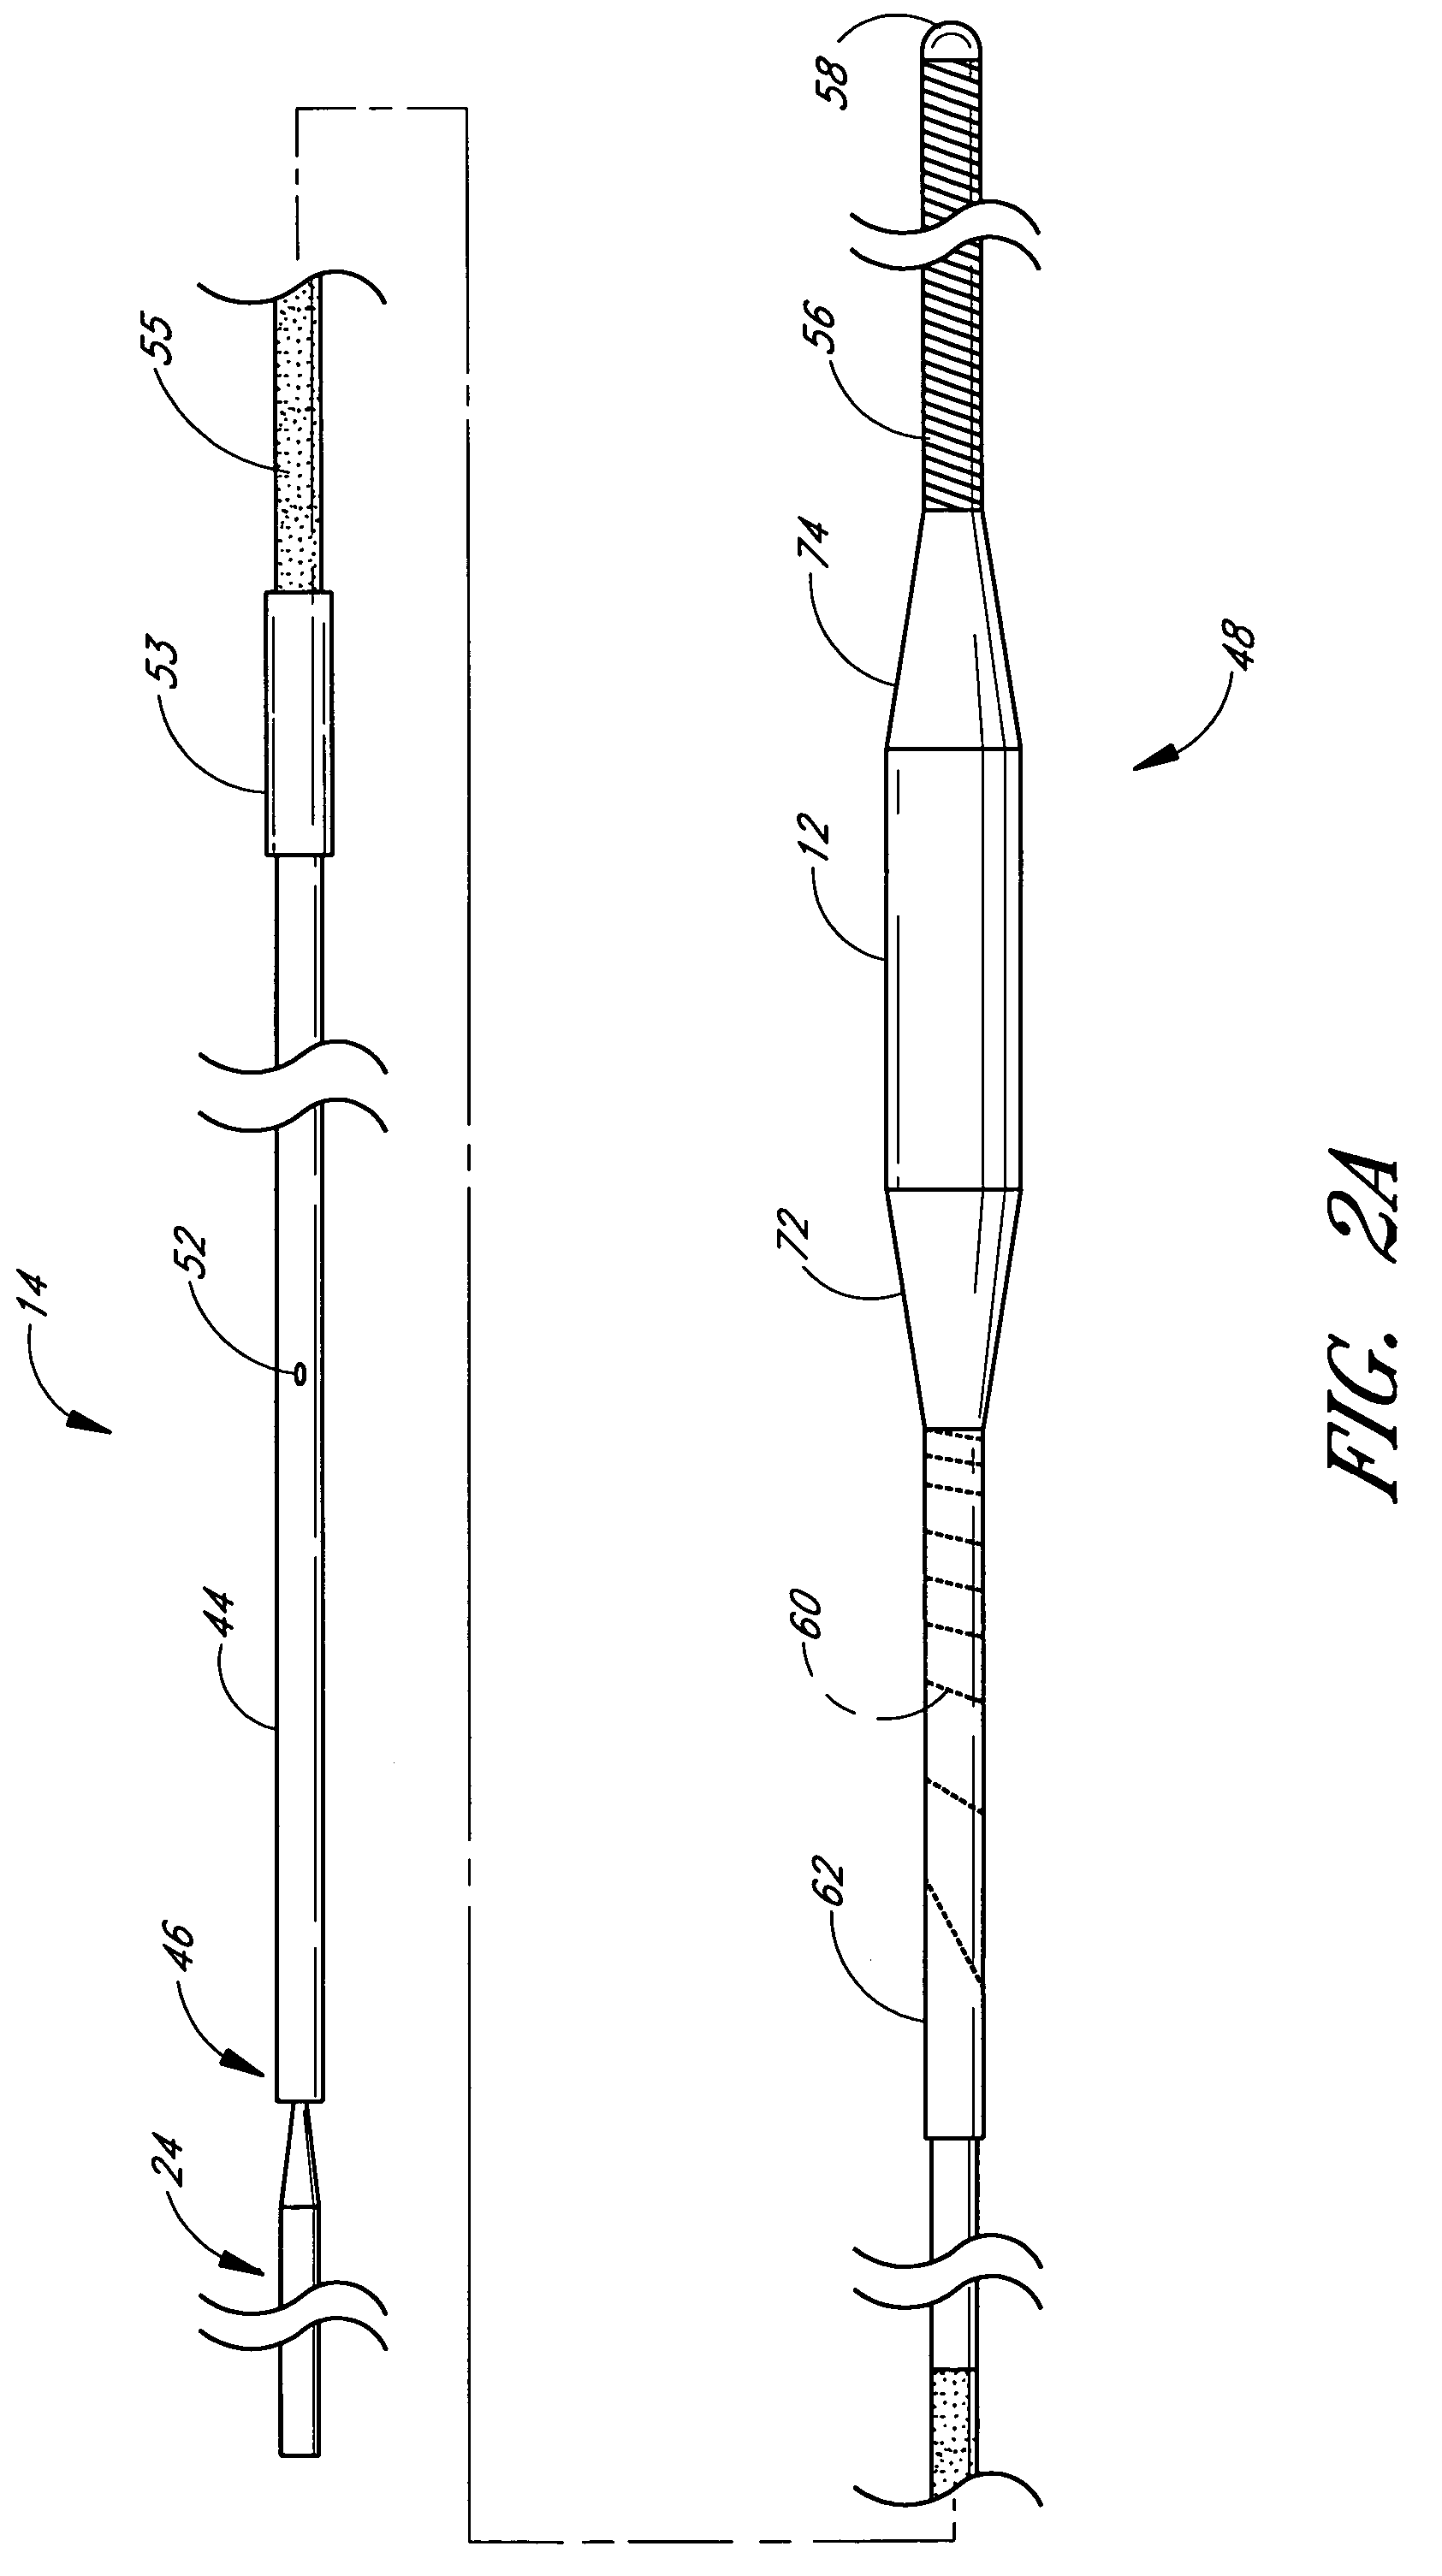 Methods and apparatuses for drug delivery to an intravascular occlusion